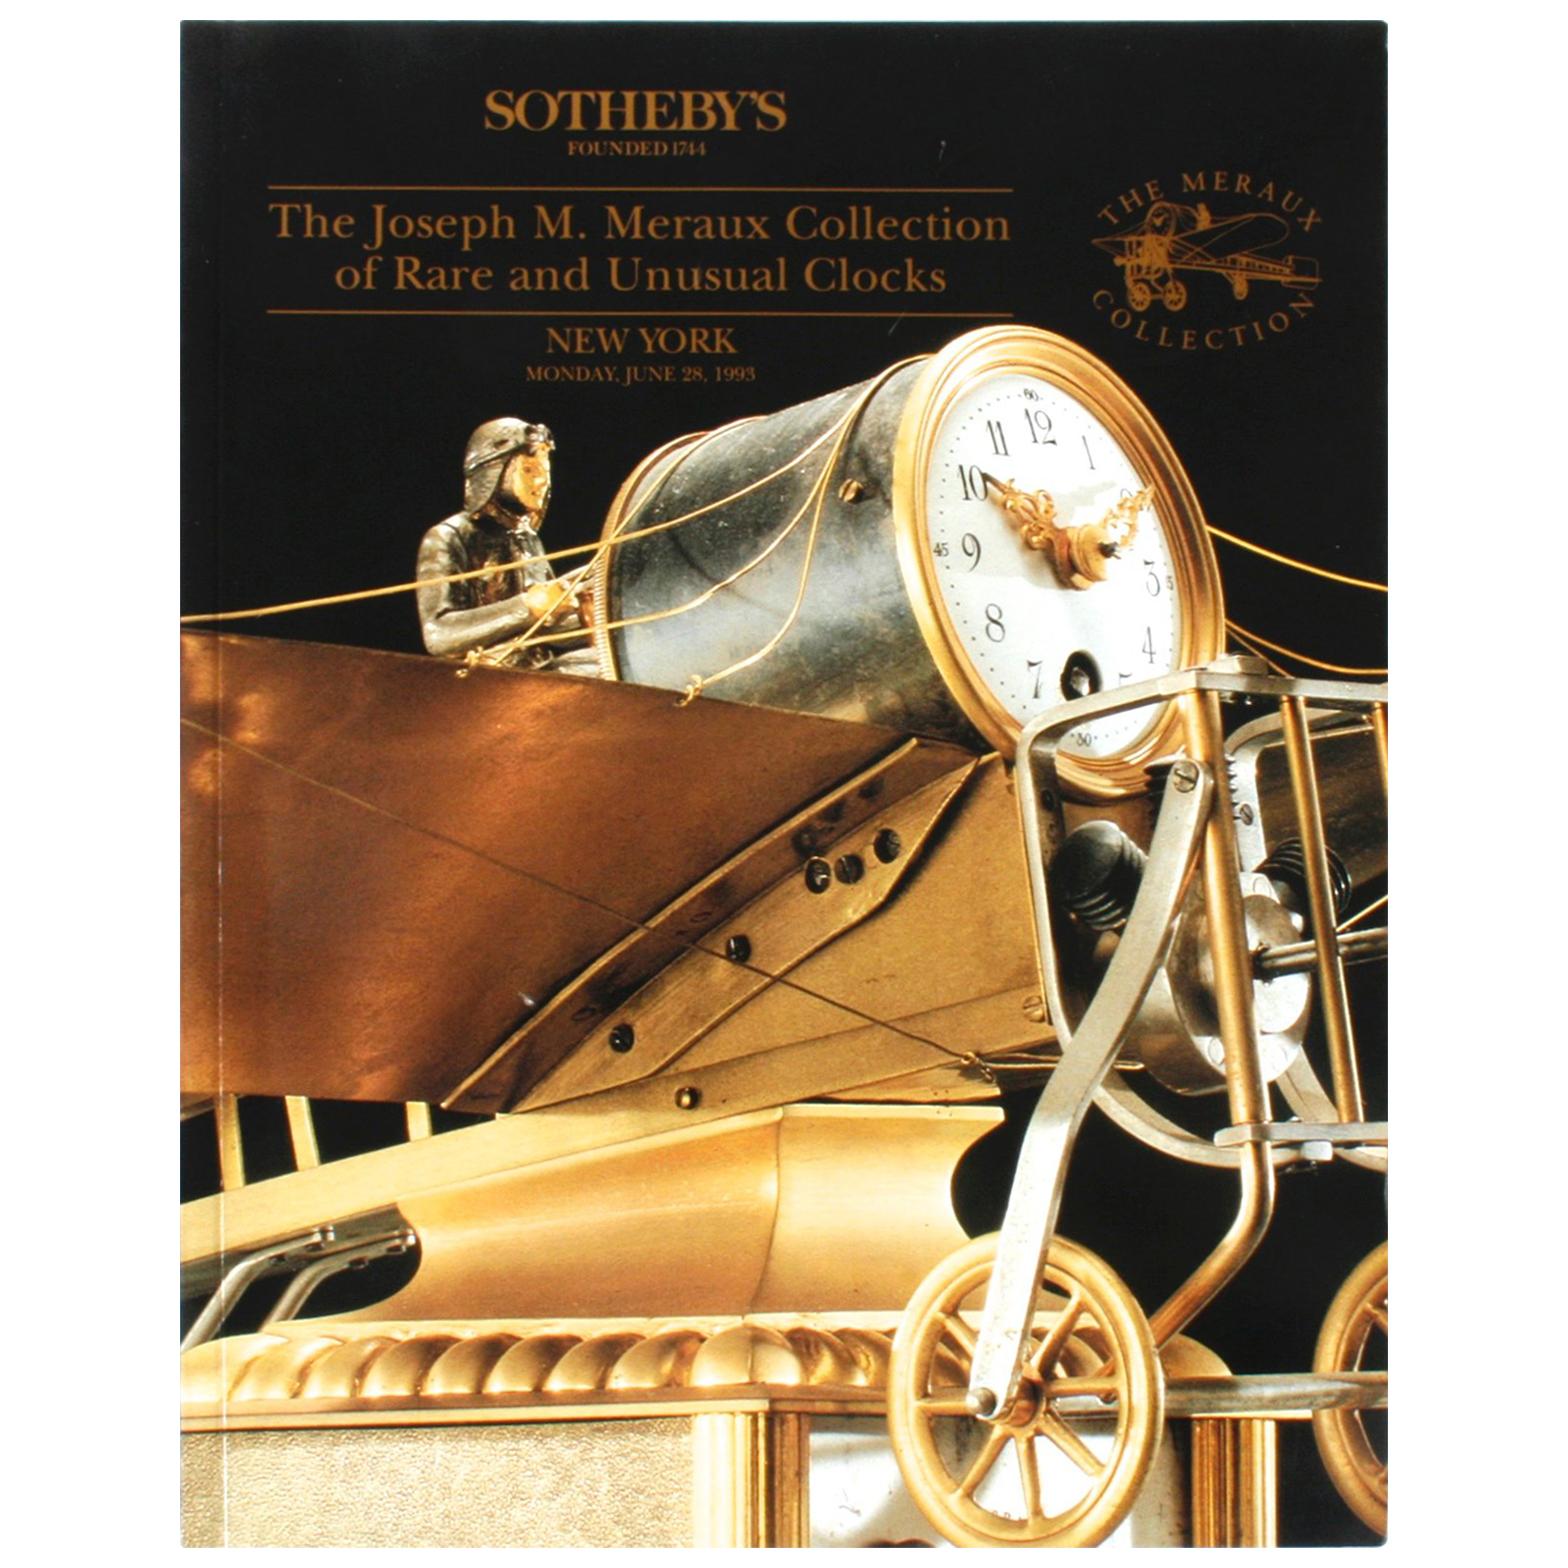 Sotheby's: The Joseph M. Meraux Collection of Rare and Unusual Clocks, 6/1993